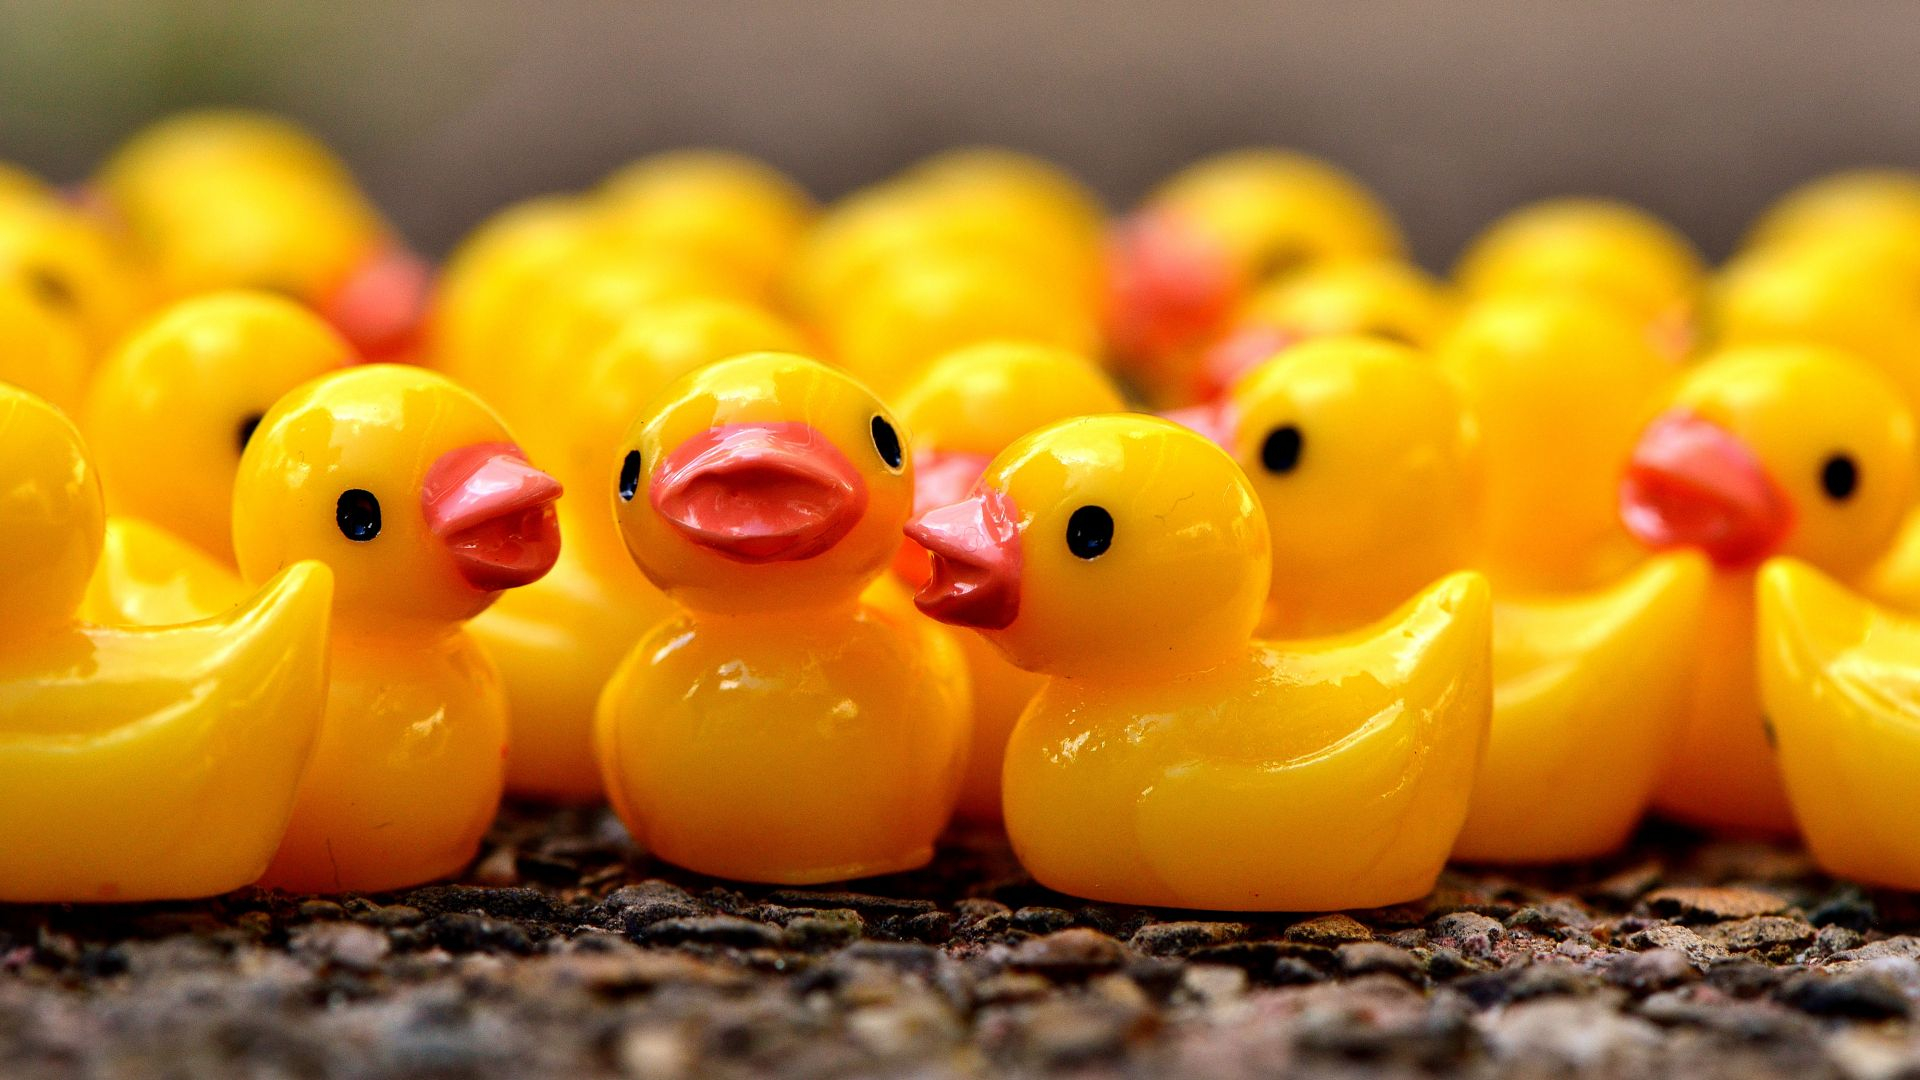 1920x1080 Desktop Wallpaper Rubber Ducks, Yellow Toys, Hd Image, Picture, Background, 8395ad